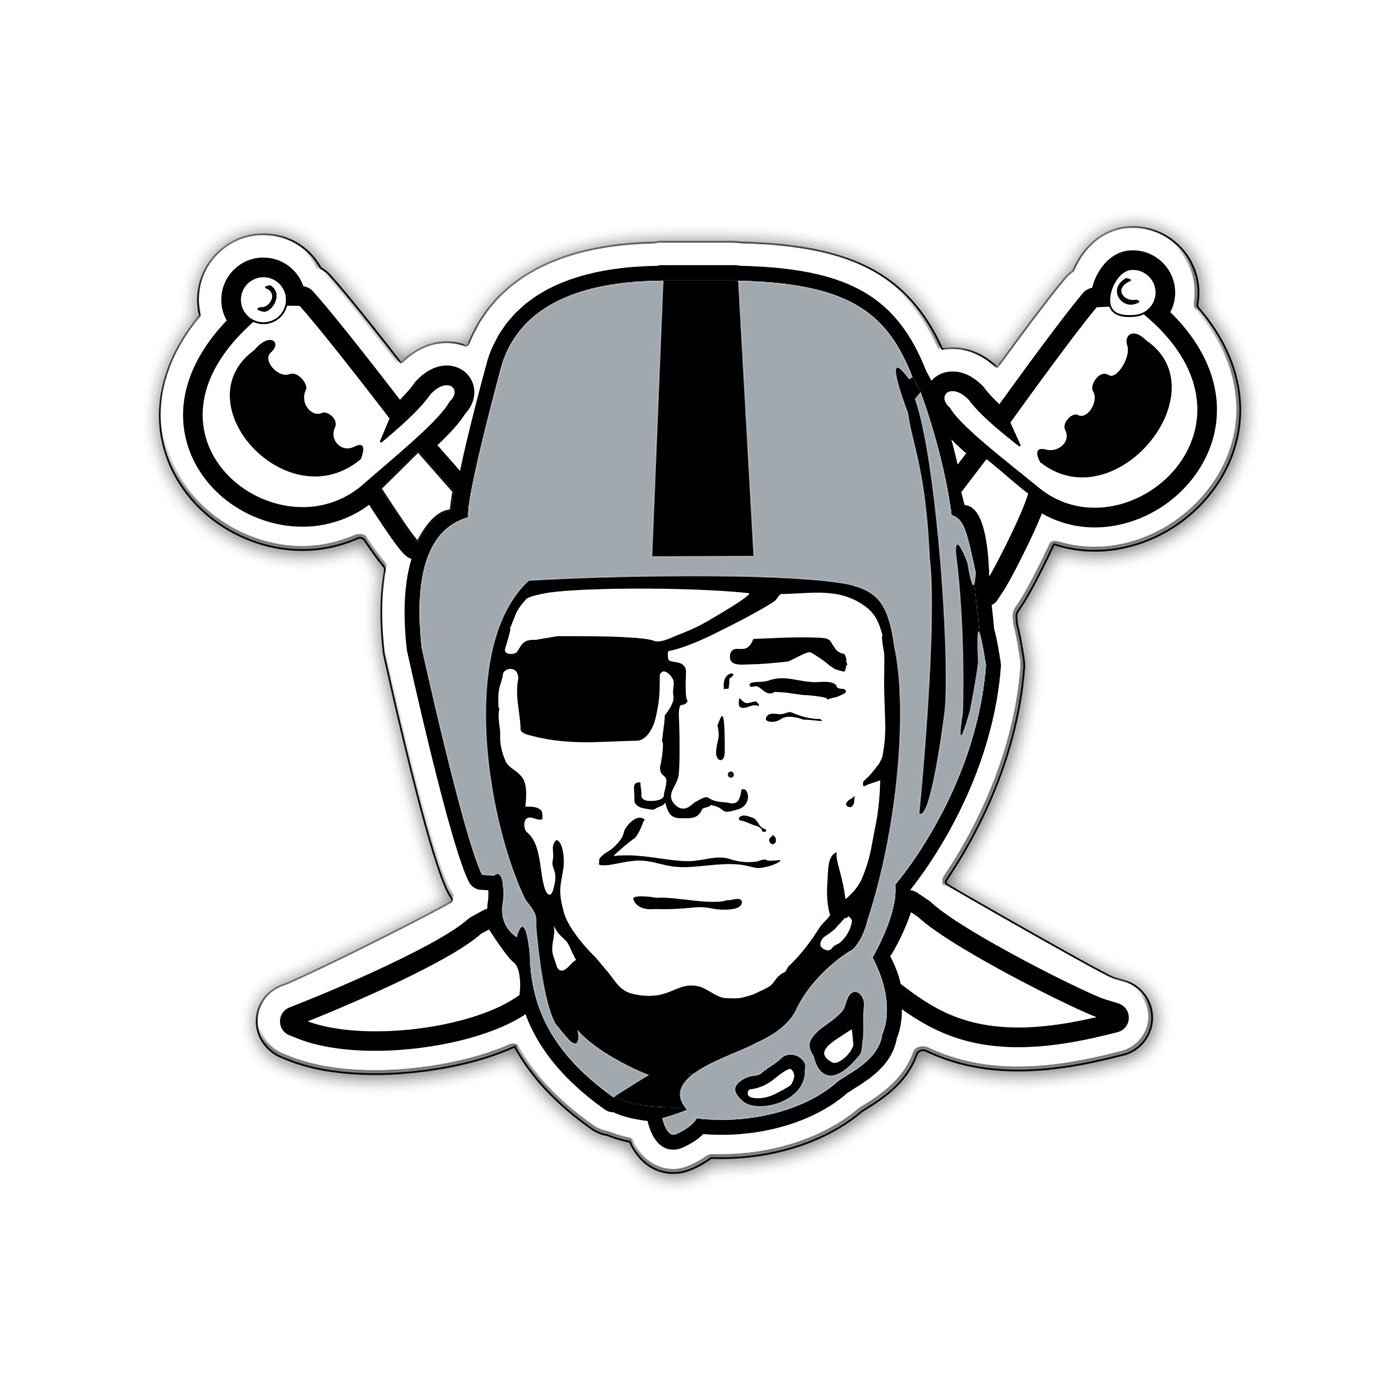 Oakland Clipart Raider Raiders Pirate Clipartmag Sketch Coloring Page.